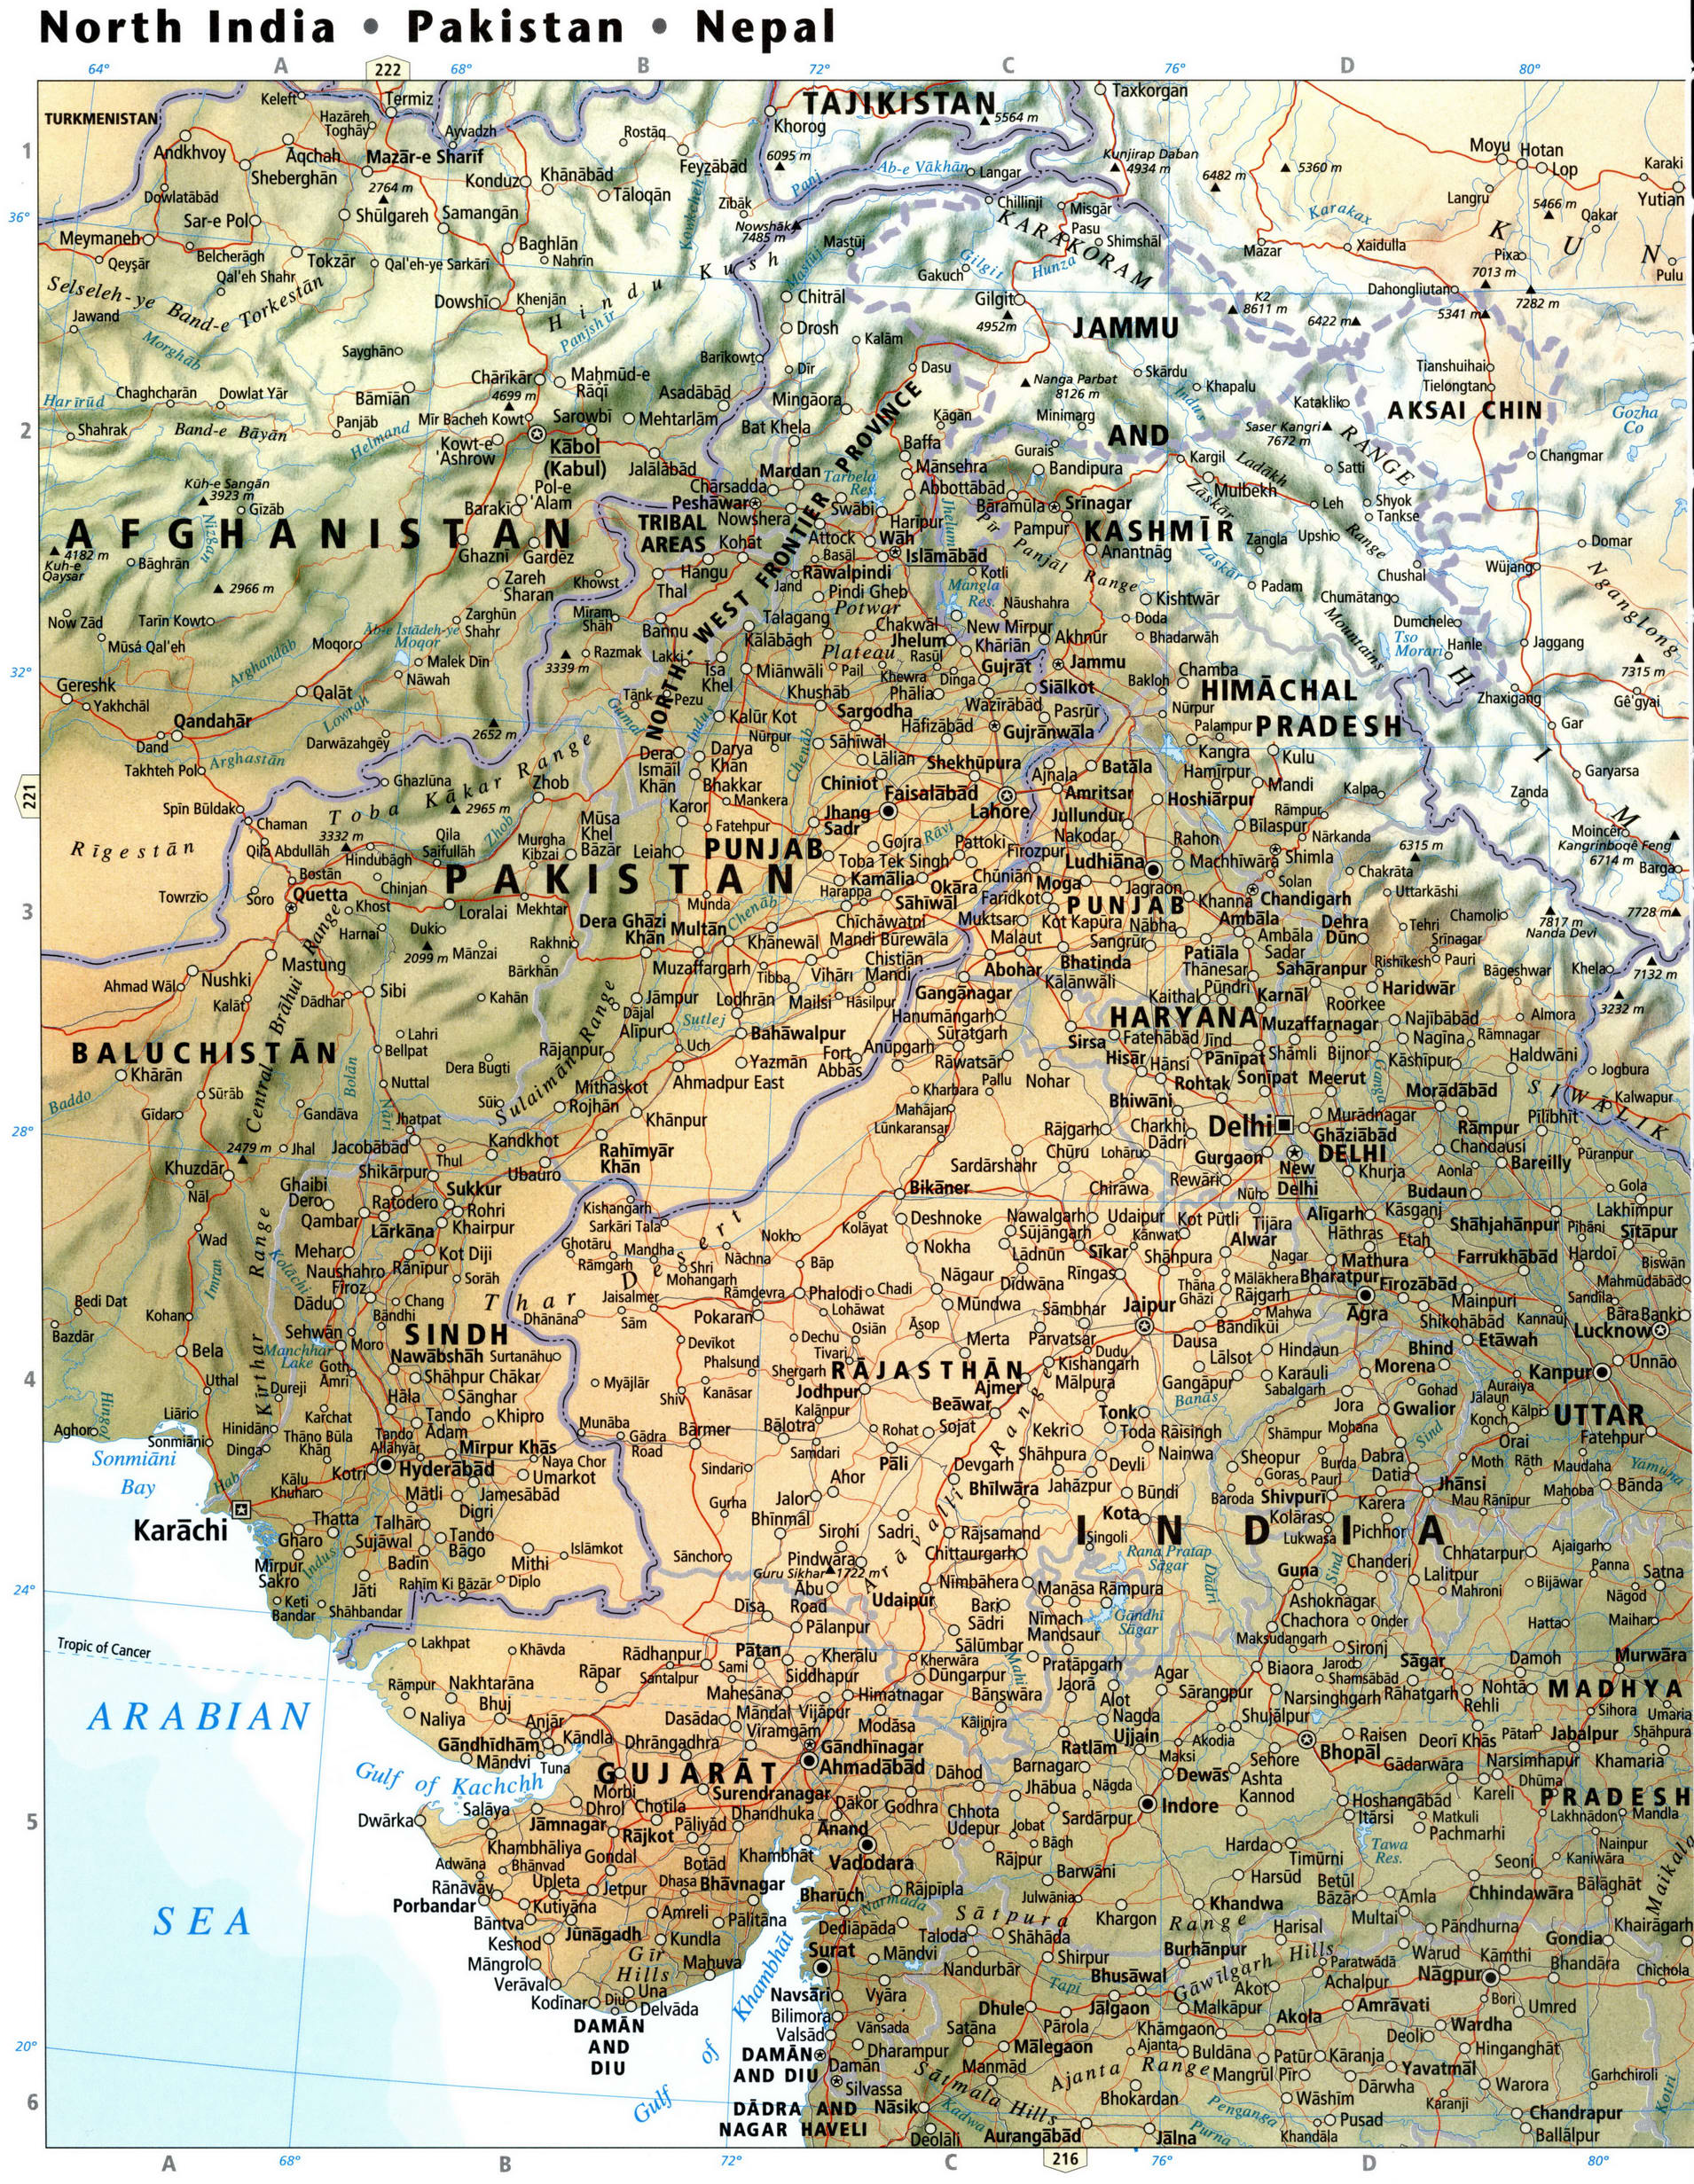 North India and Pakistan map